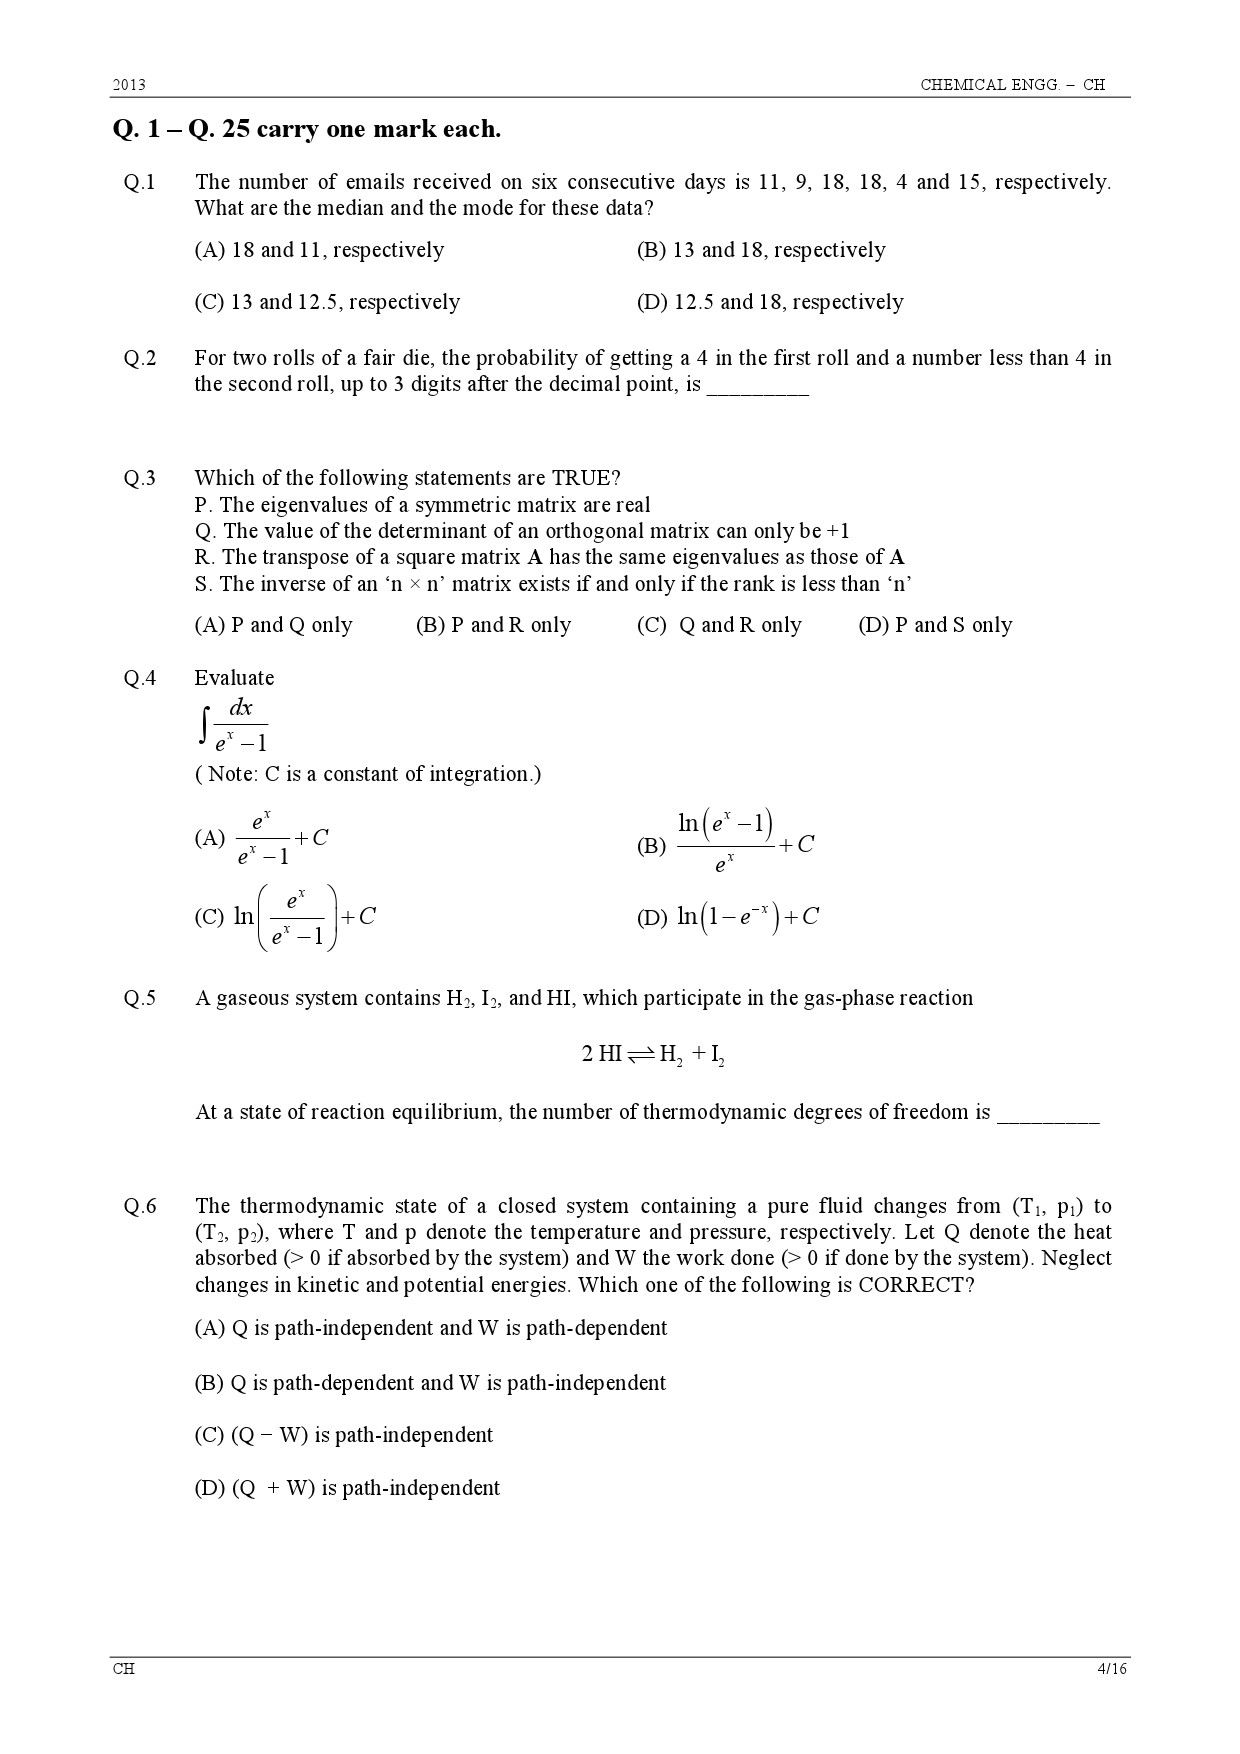 GATE Exam Question Paper 2013 Chemical Engineering 4